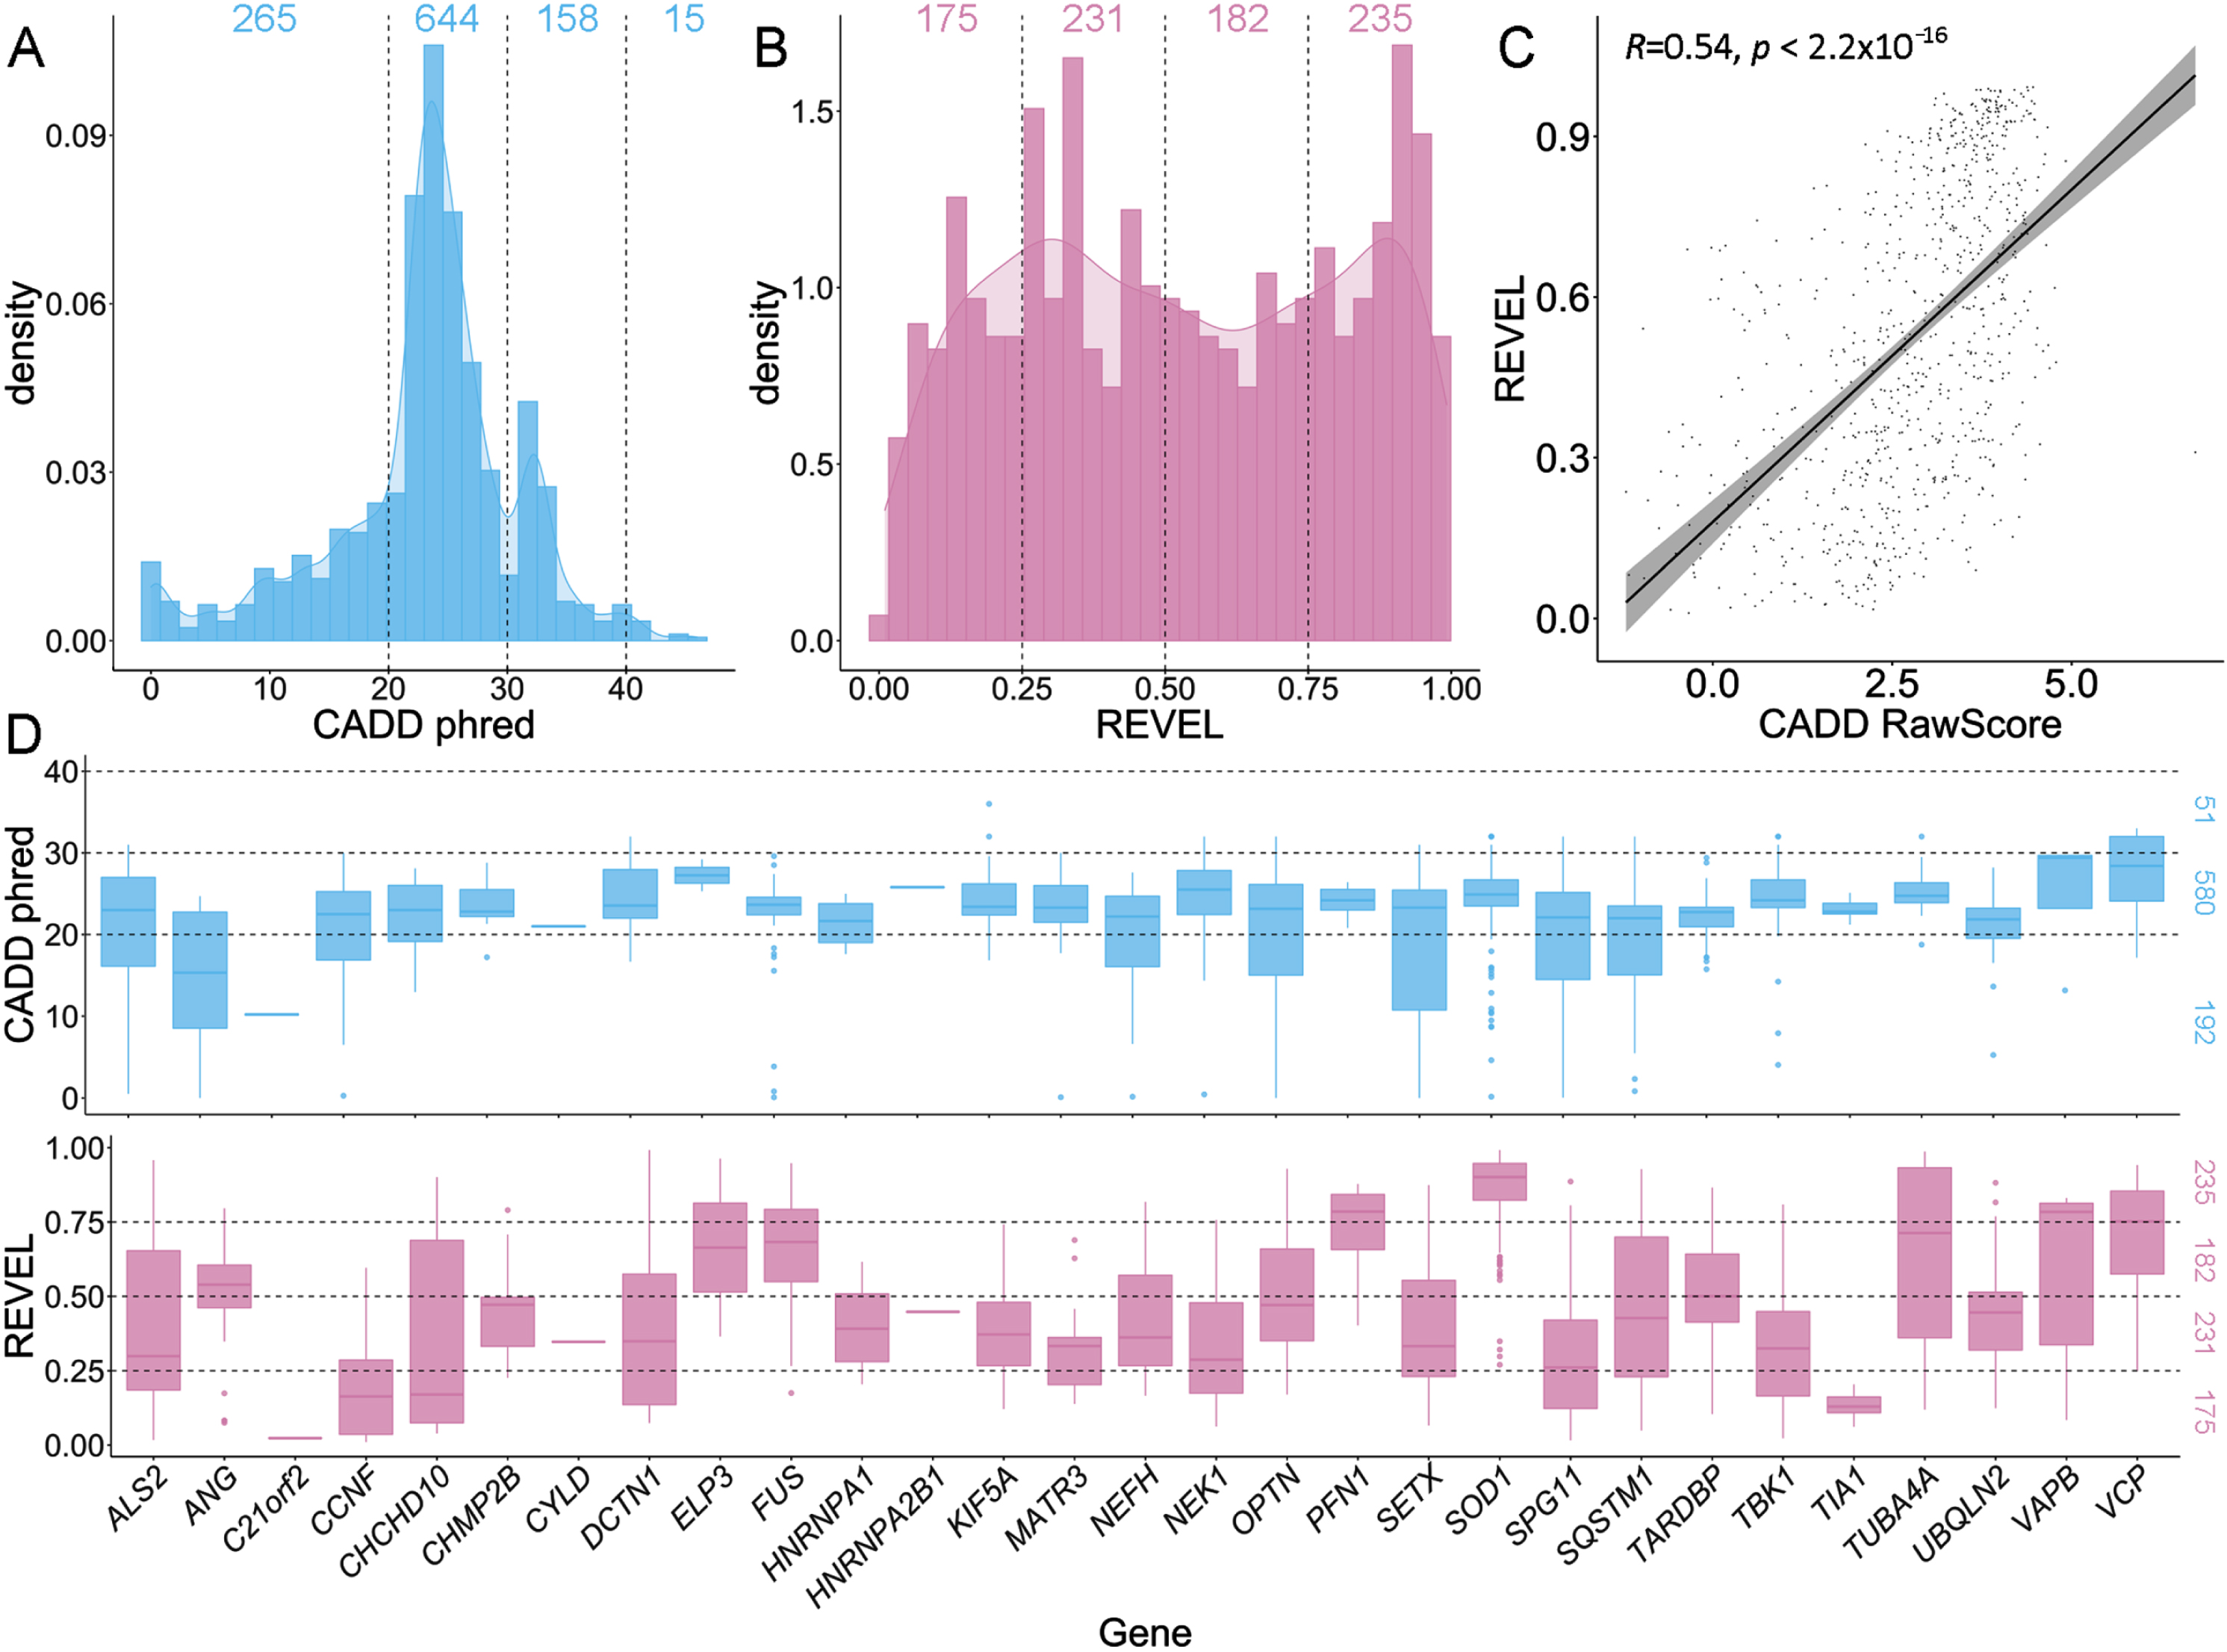 Comparison of CADD and REVEL predicted deleteriousness scores for all rare ALS-implicated variants. A) Density plot of CADD phred scores for all 1,082 rare variants of any variant type. Supplementary Fig. S2 provides a further breakdown of CADD phred scores per gene for different variant types. B) Density plot of REVEL scores for the 823 rare missense variants. C) Scatter plot with regression line (cor = 0.5372964) and Pearson’s correlation testing (p < 2.2x10-16) of CADD RawScore and REVEL scores for the 823 rare missense variants. D) Box plots of CADD phred and REVEL scores per ALS gene for the 823 rare missense variants.